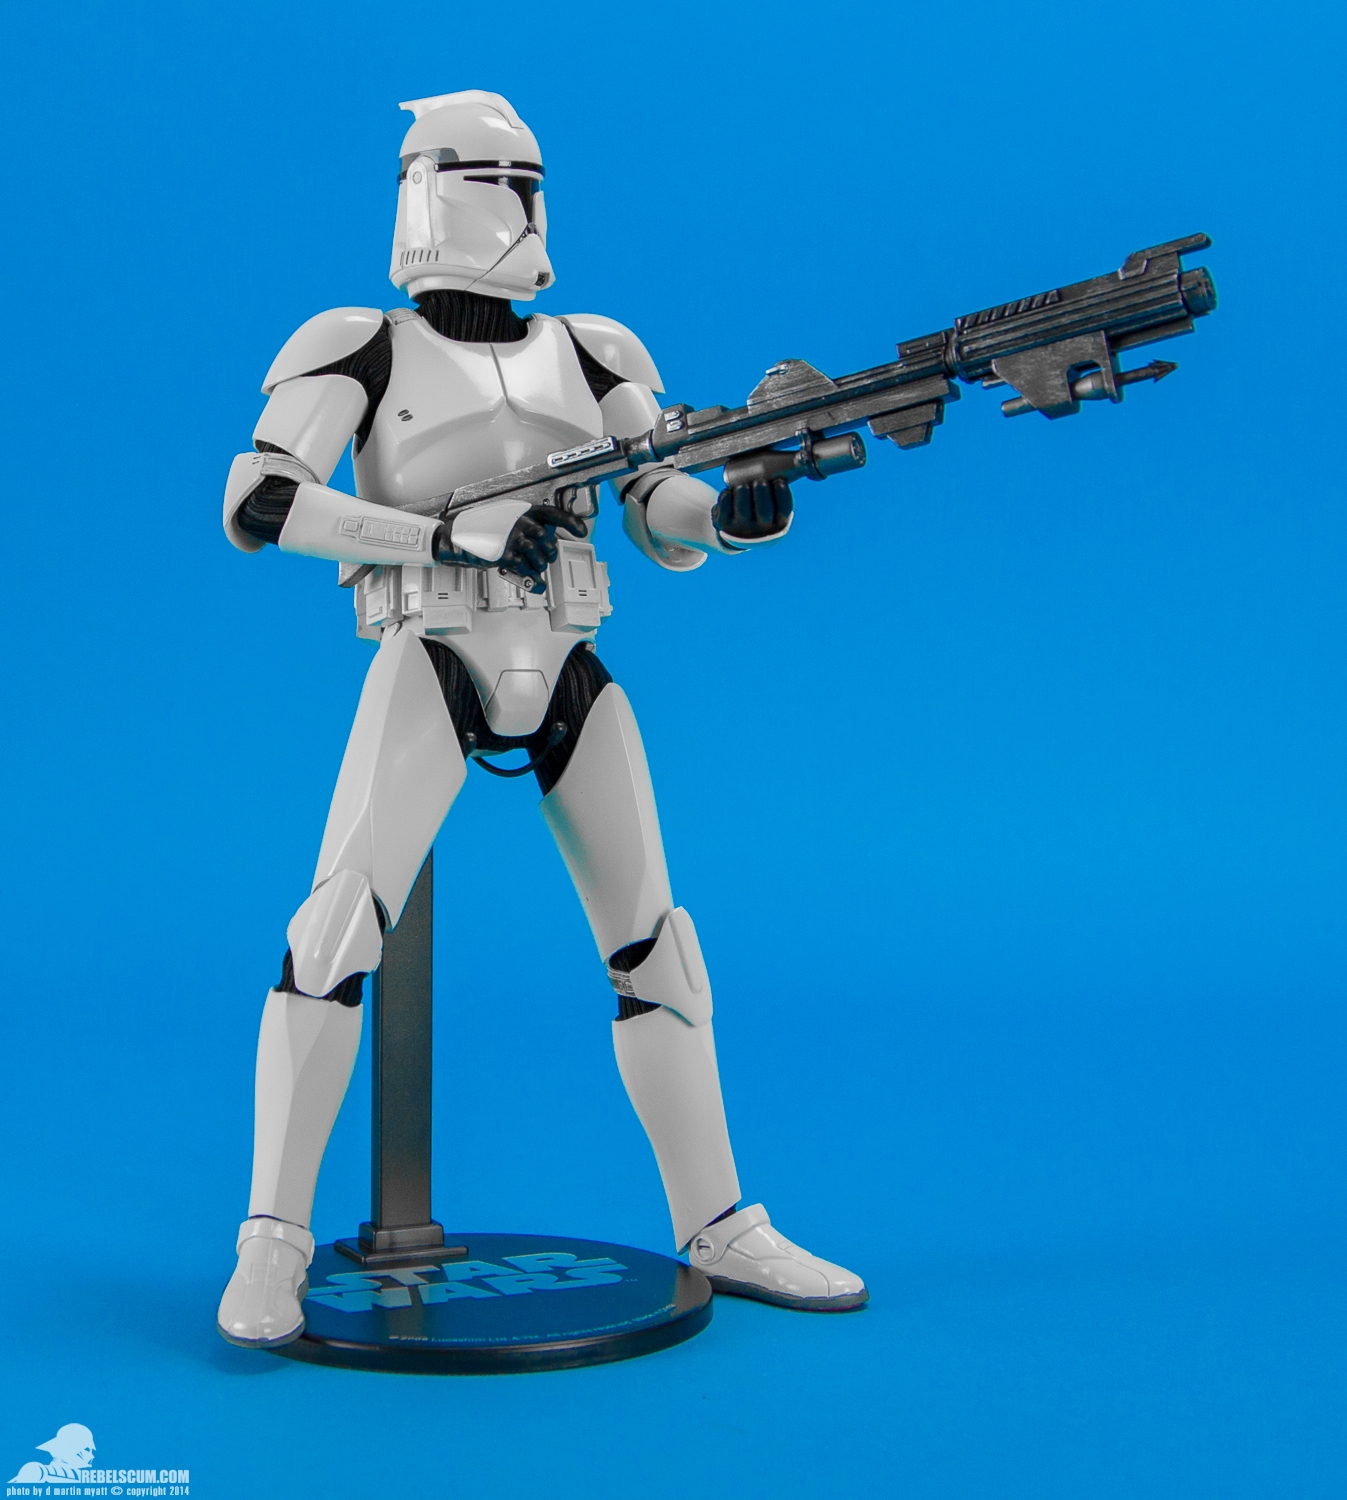 Shiny-Clone-Trooper-Deluxe-Sixth-Scale-Figure-Sideshow-014.jpg